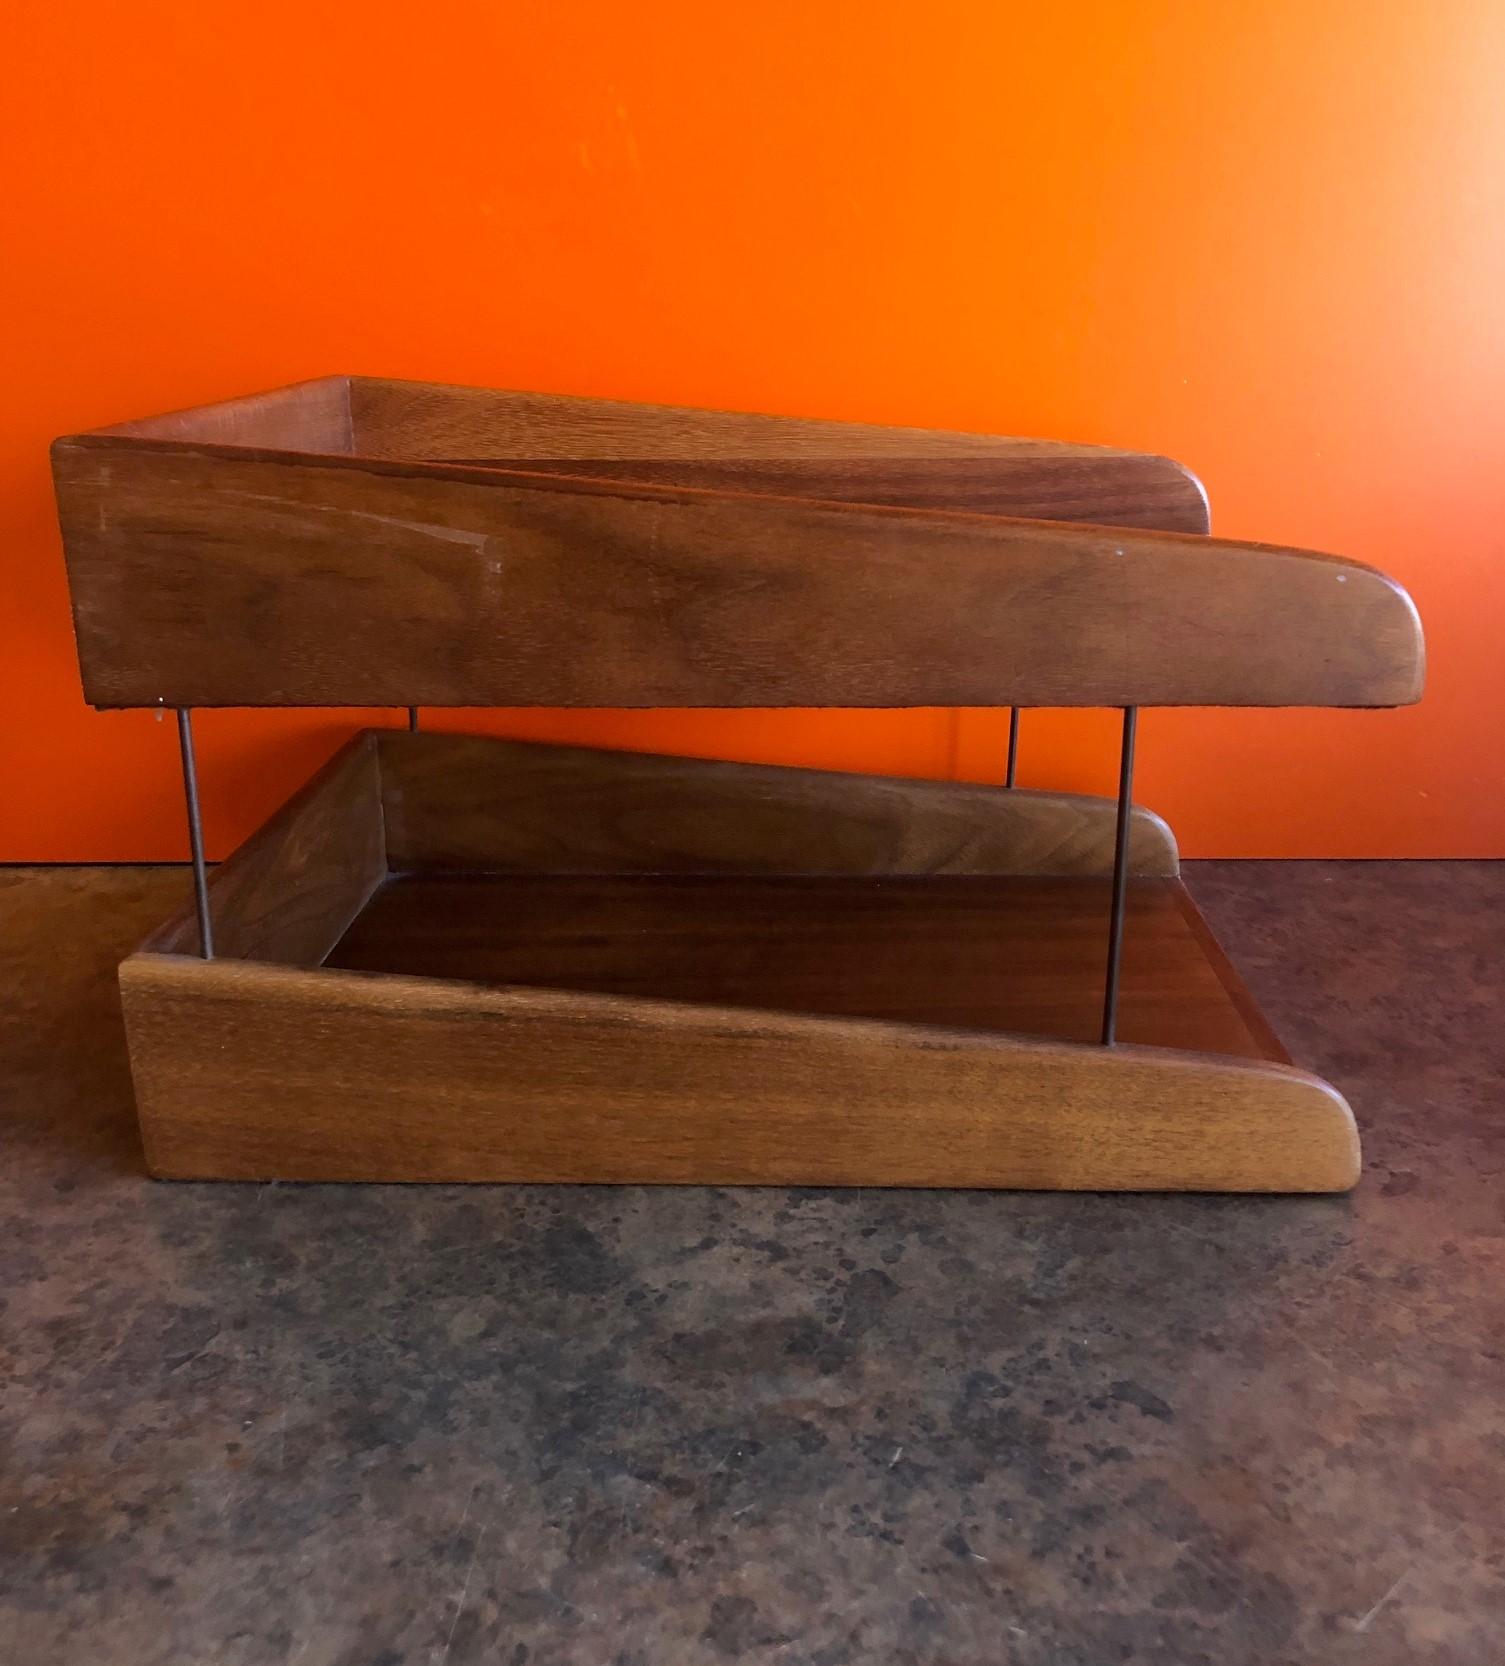 20th Century Midcentury Double Letter Tray in Walnut by Unicor